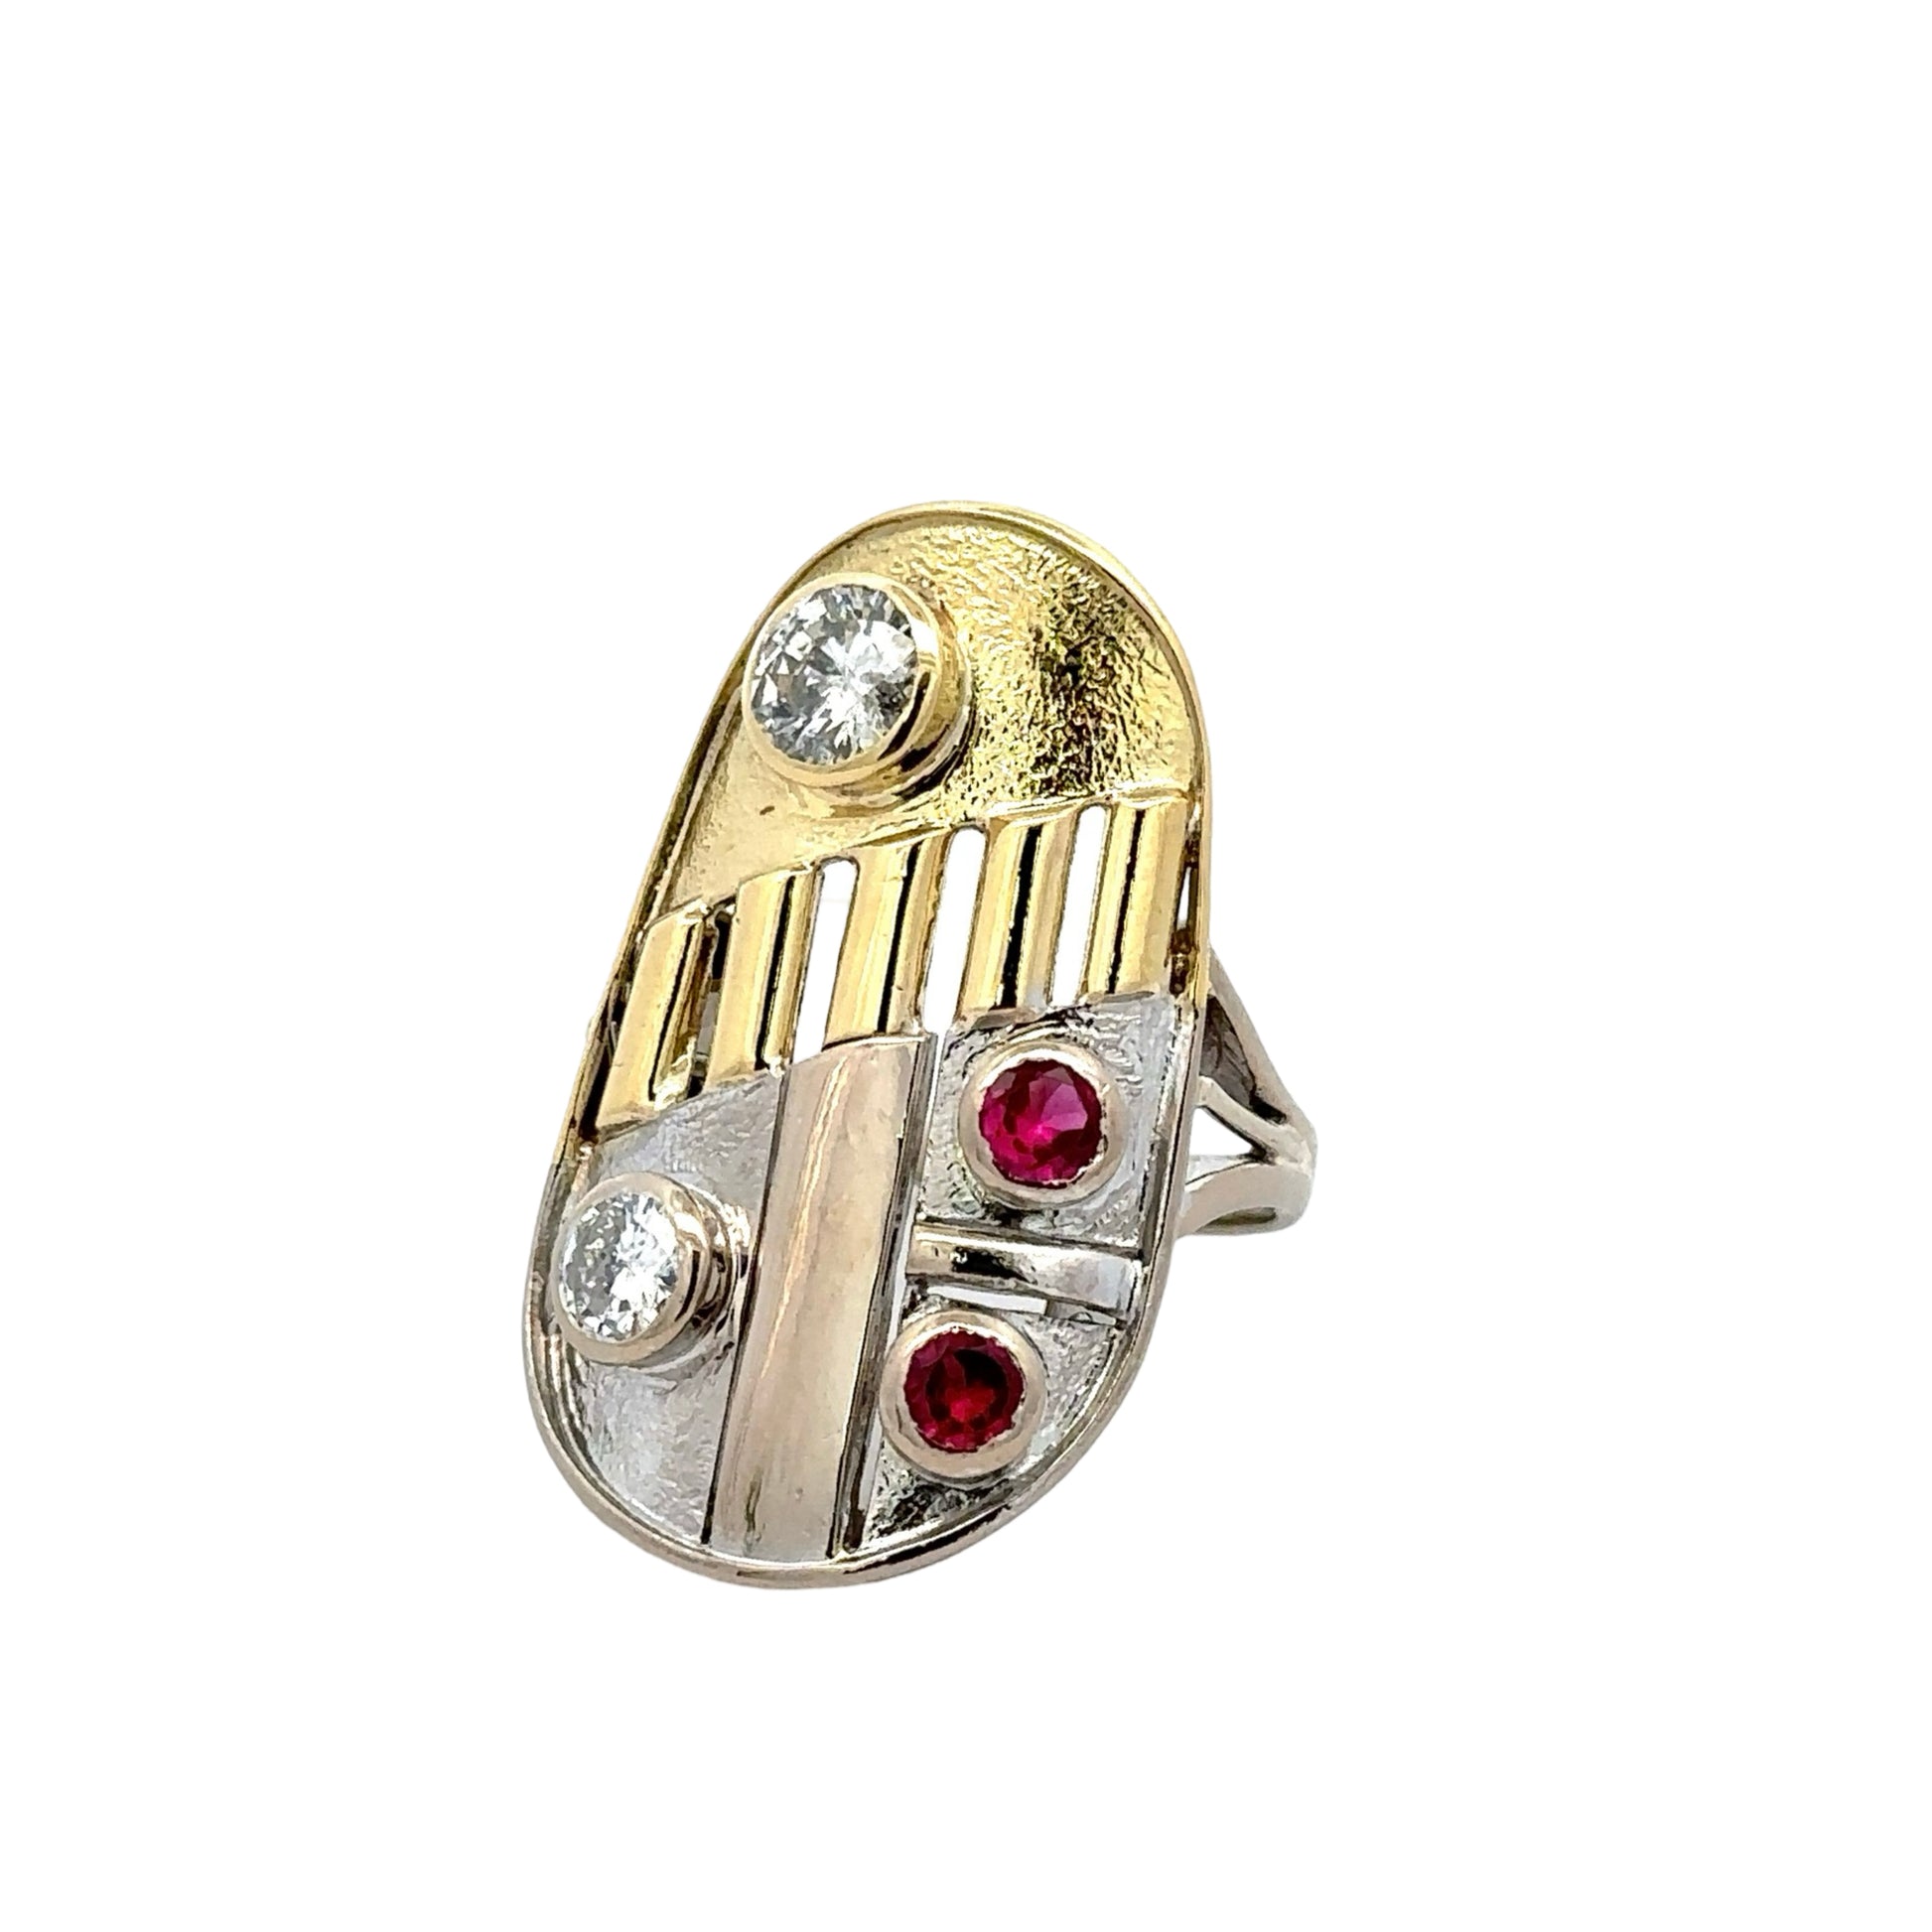 Diagonal view of two toned diamond and gemstone ring